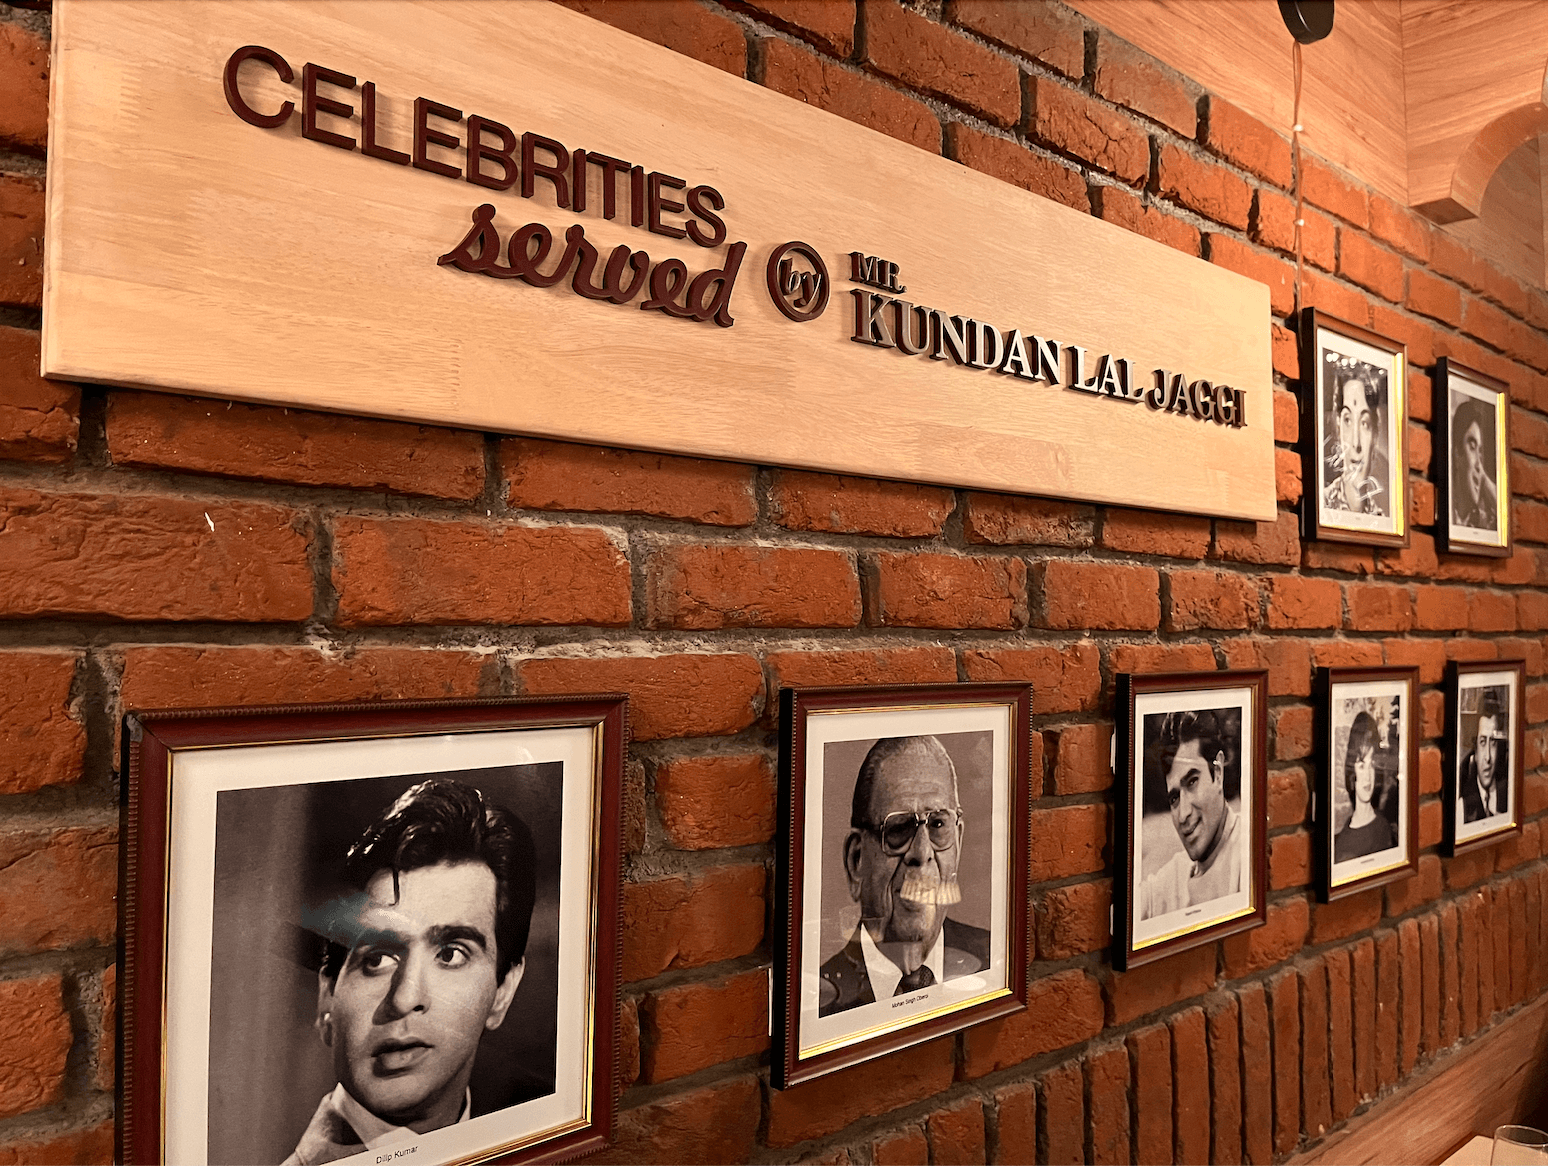 Photos of celebrities, including two former Indian prime ministers, adorn the walls of the Daryaganj restaurant, which claims the celebrities were patrons of the restaurant founder's grandfather.